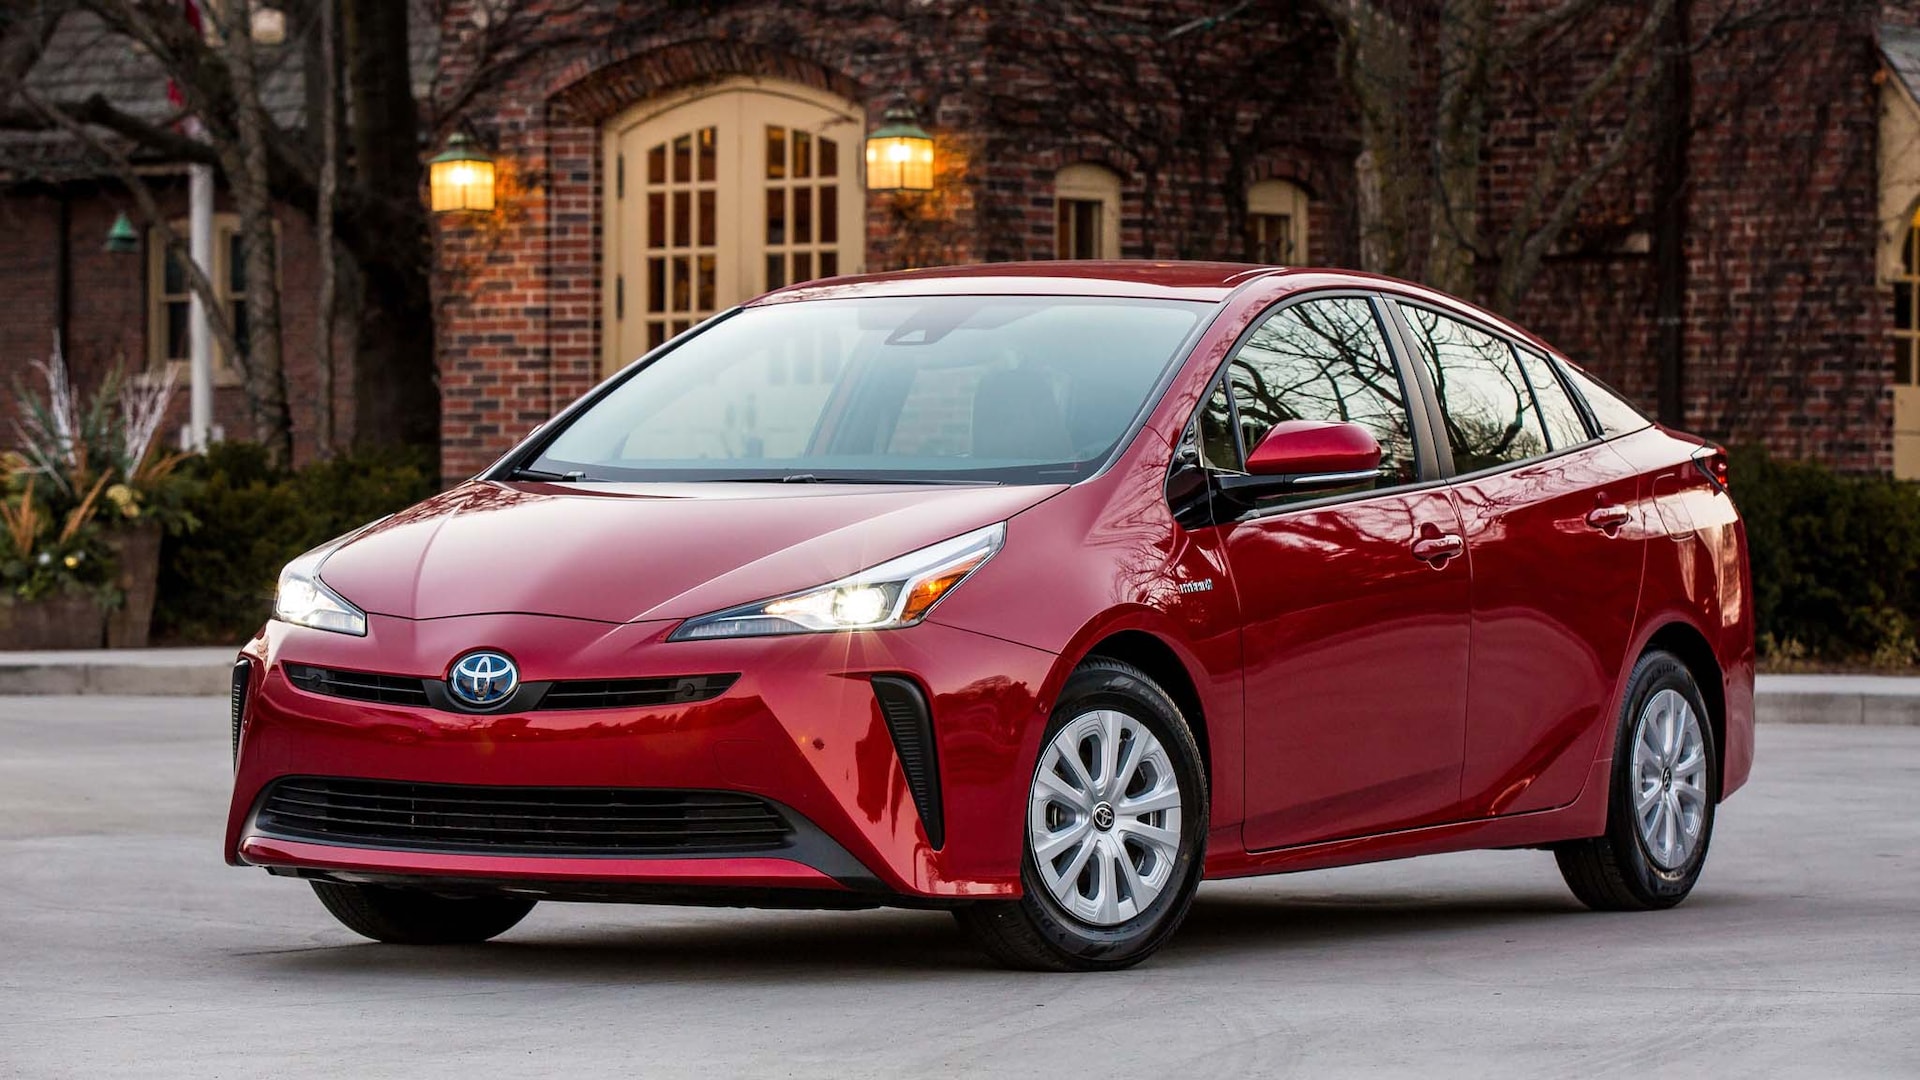 2020 Toyota Prius Prices, Reviews, and Photos - MotorTrend